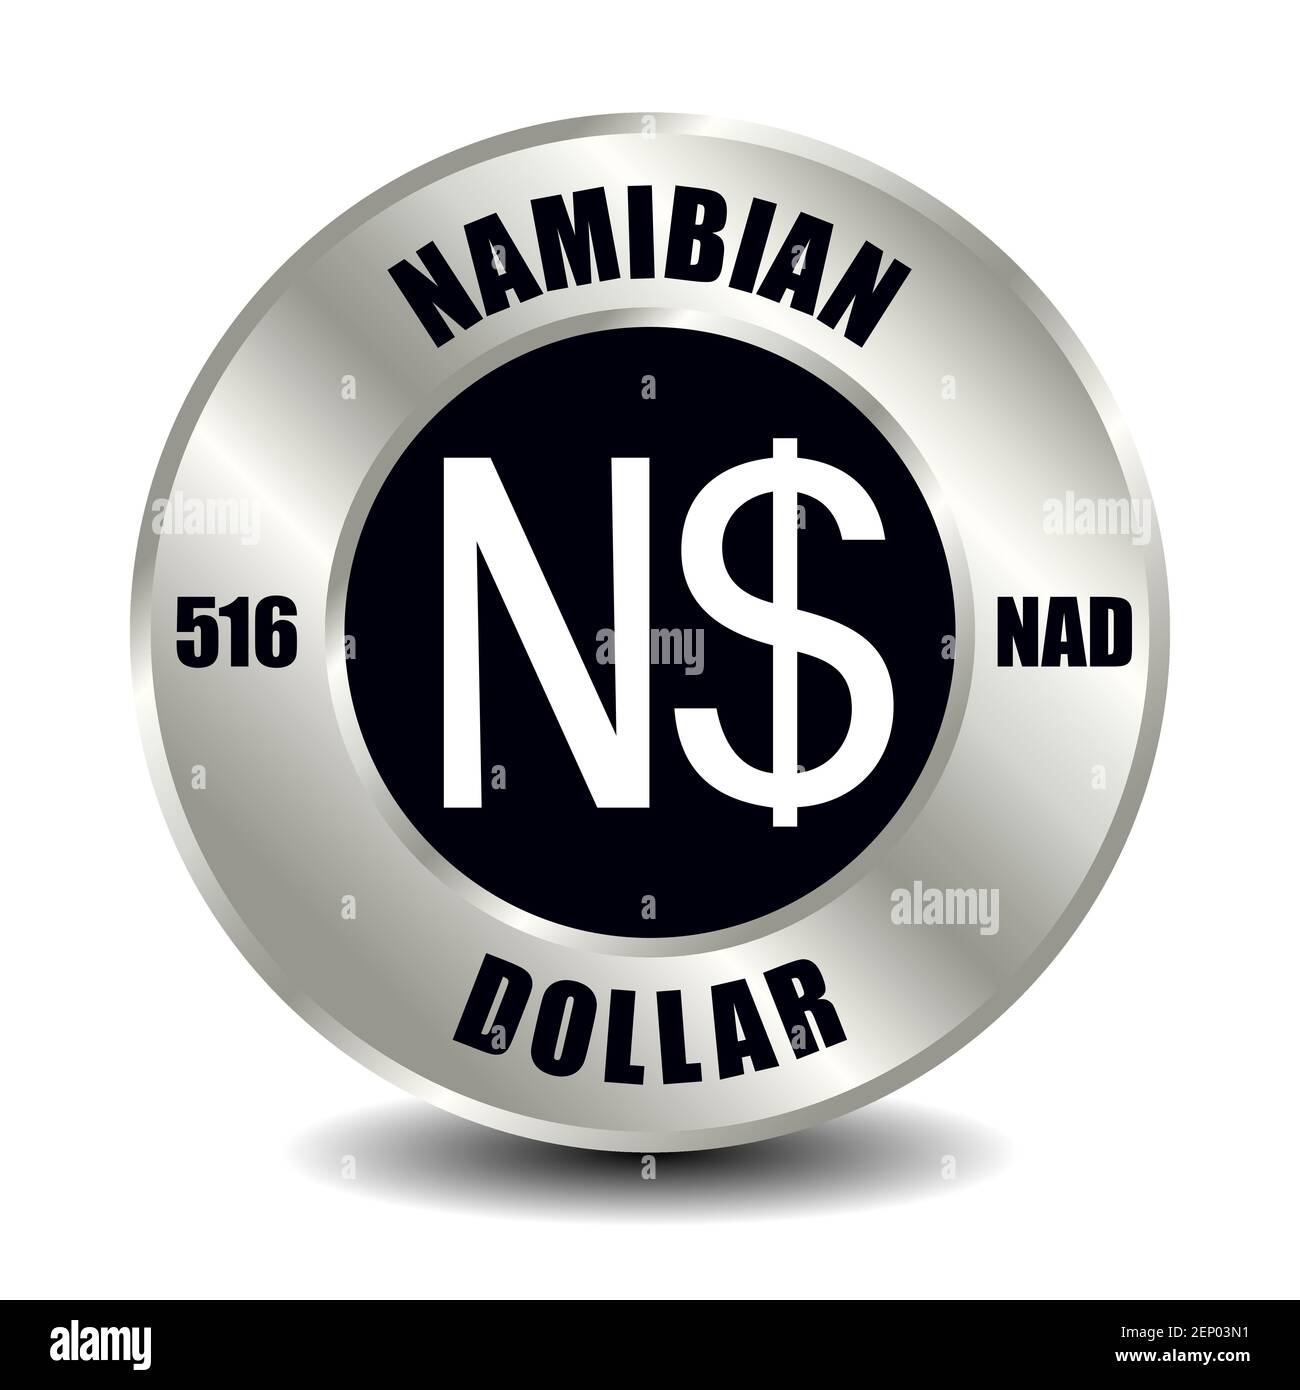 Namibia money icon isolated on round silver coin. Vector sign of currency symbol with international ISO code and abbreviation Stock Vector